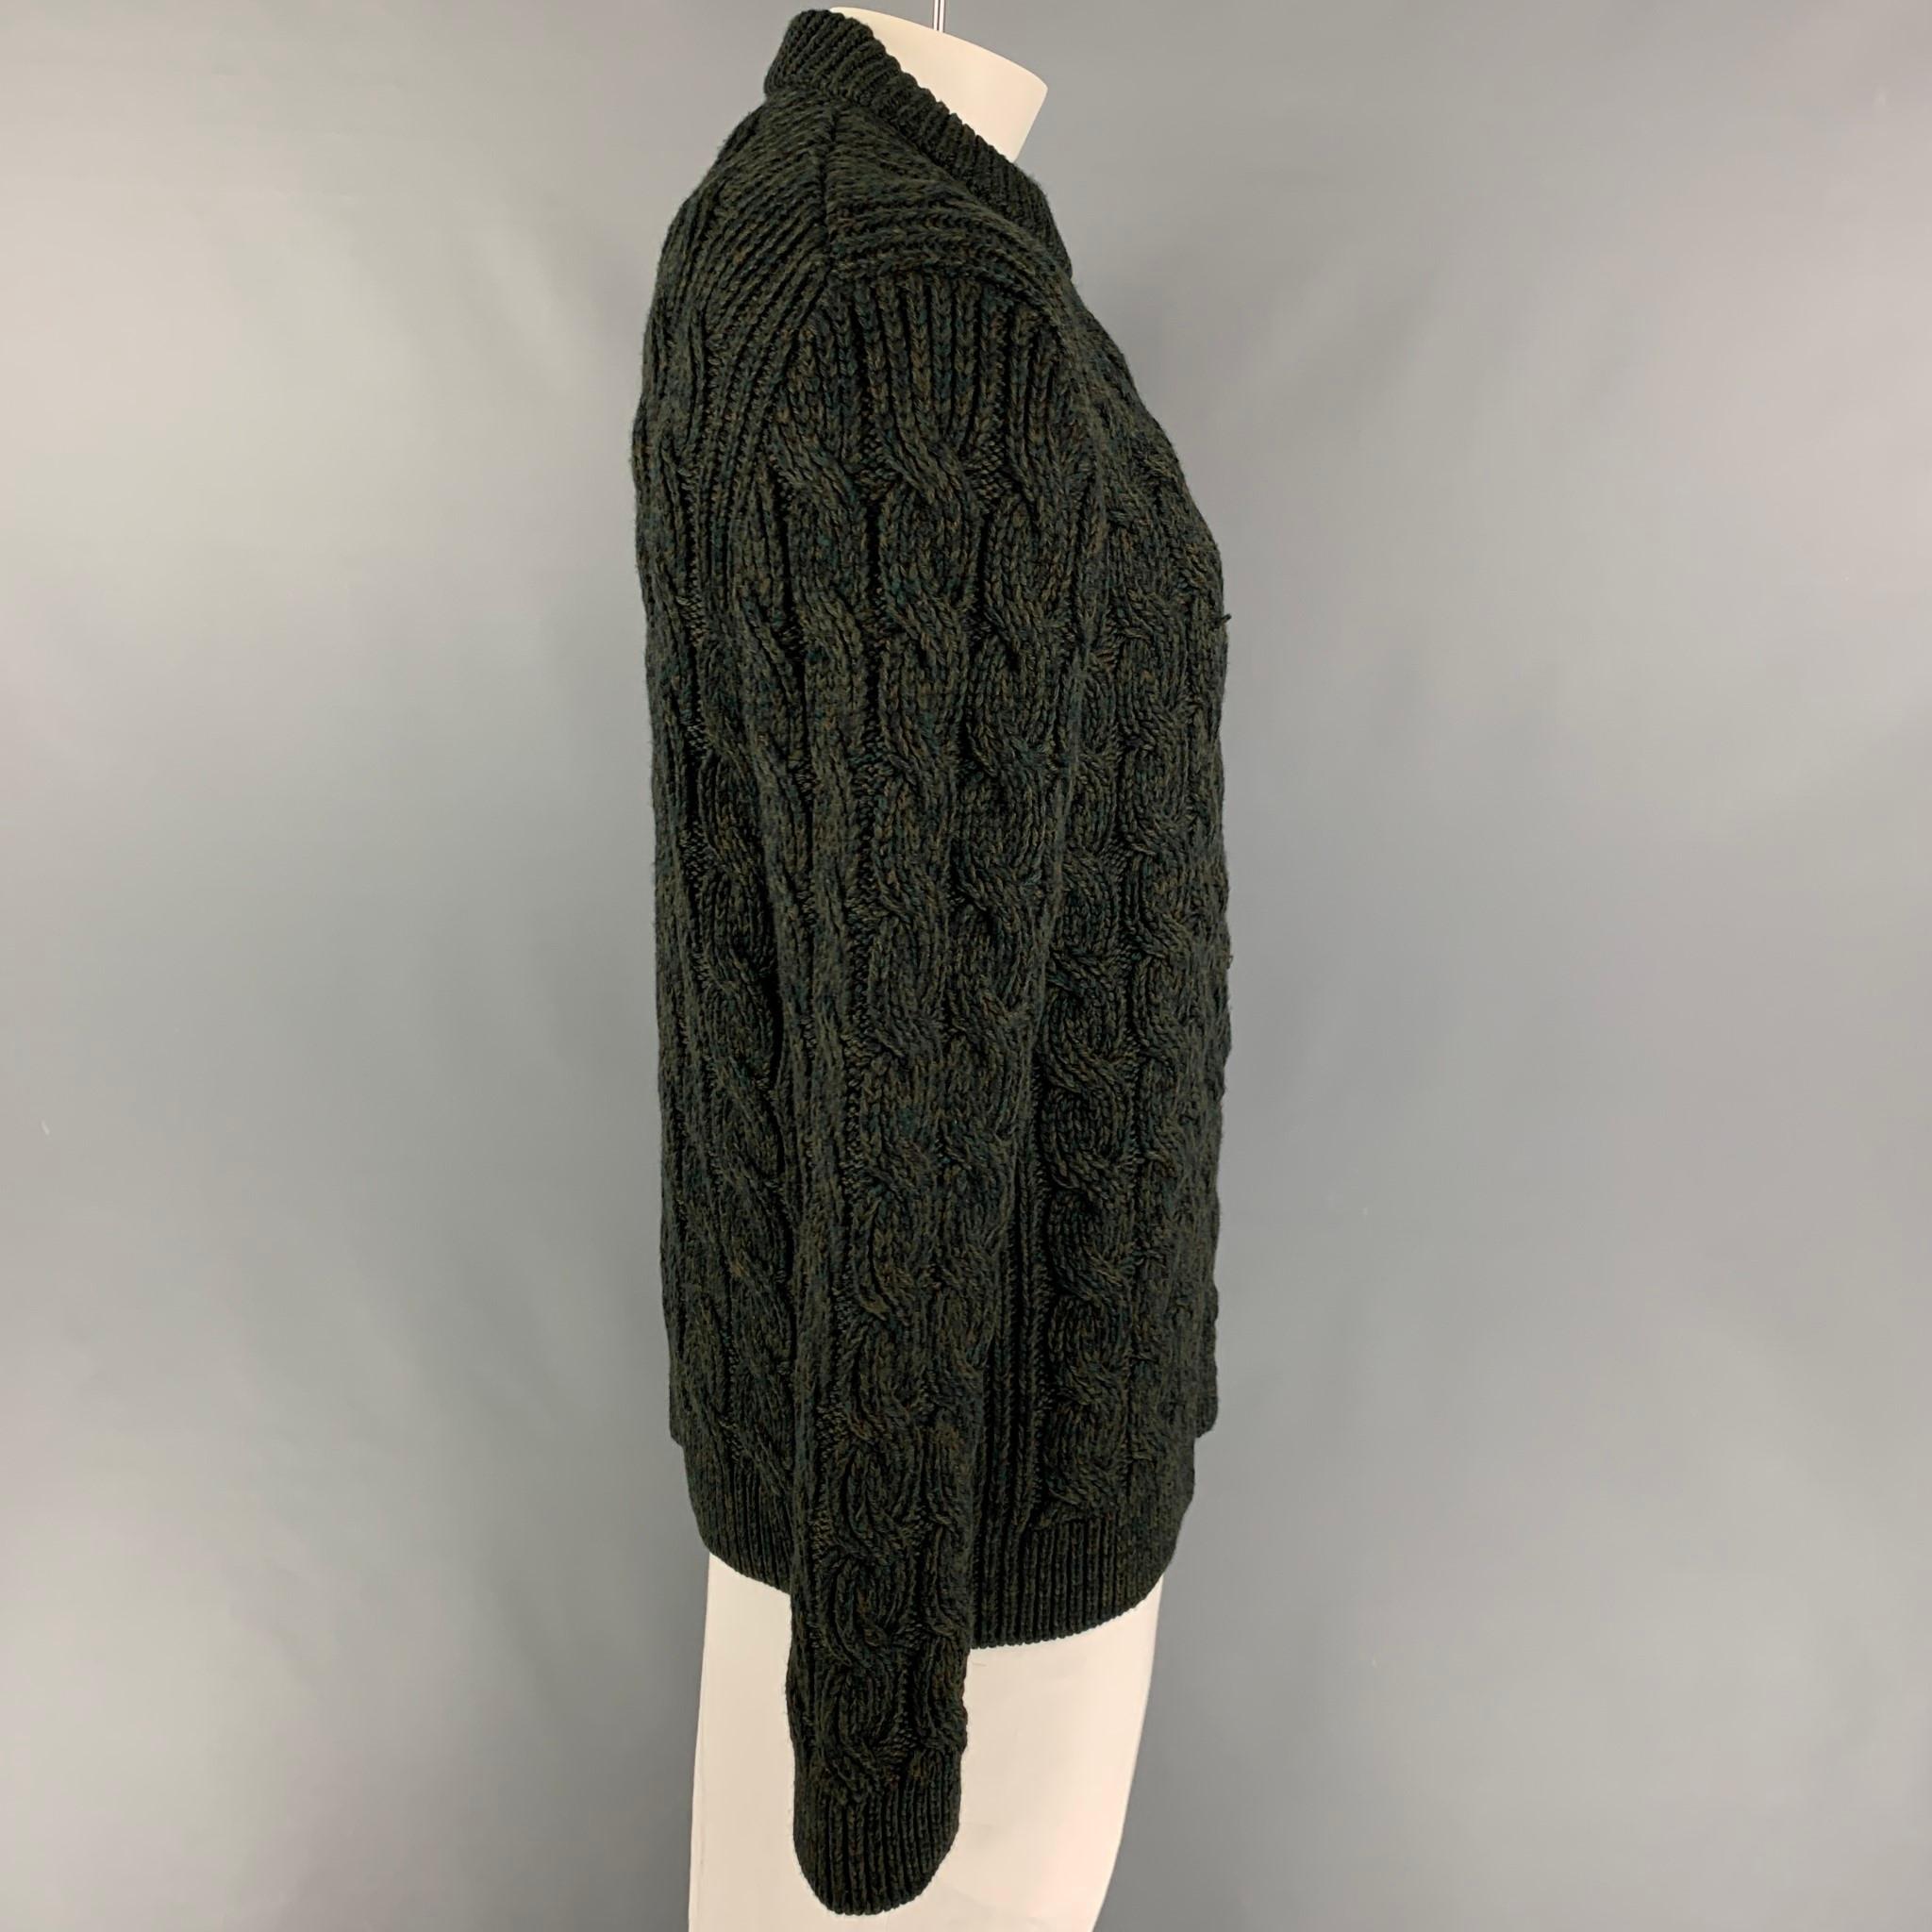 PRADA sweater comes in a green & olive chunky knit virgin wool  featuring a crew-neck. Made in Italy. 

Very Good Pre-Owned Condition.
Marked: 56

Measurements:

Shoulder: 18 in.
Chest: 46 in.
Sleeve: 28 in.
Length: 30 in. 